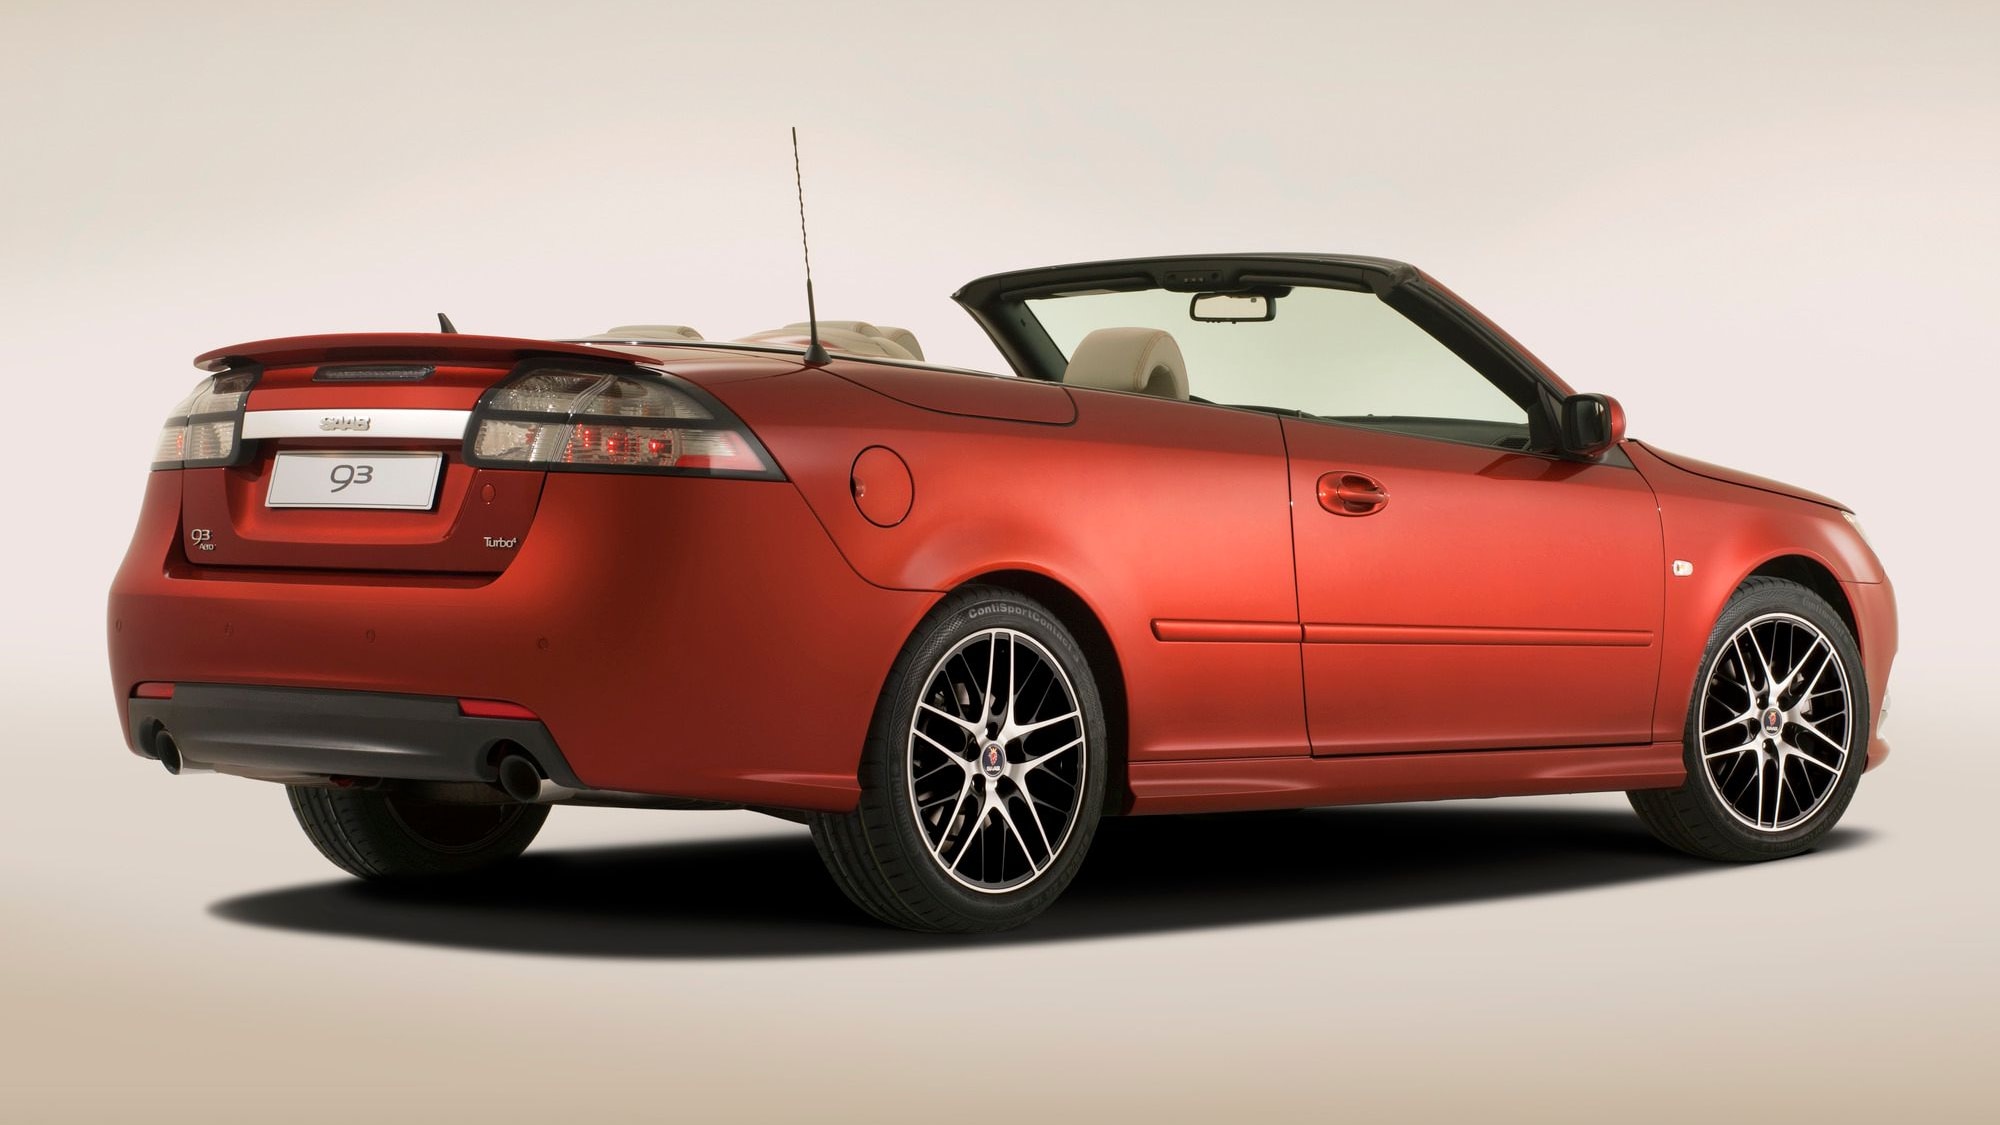 2012 Saab 9-3 Convertible Independence Edition